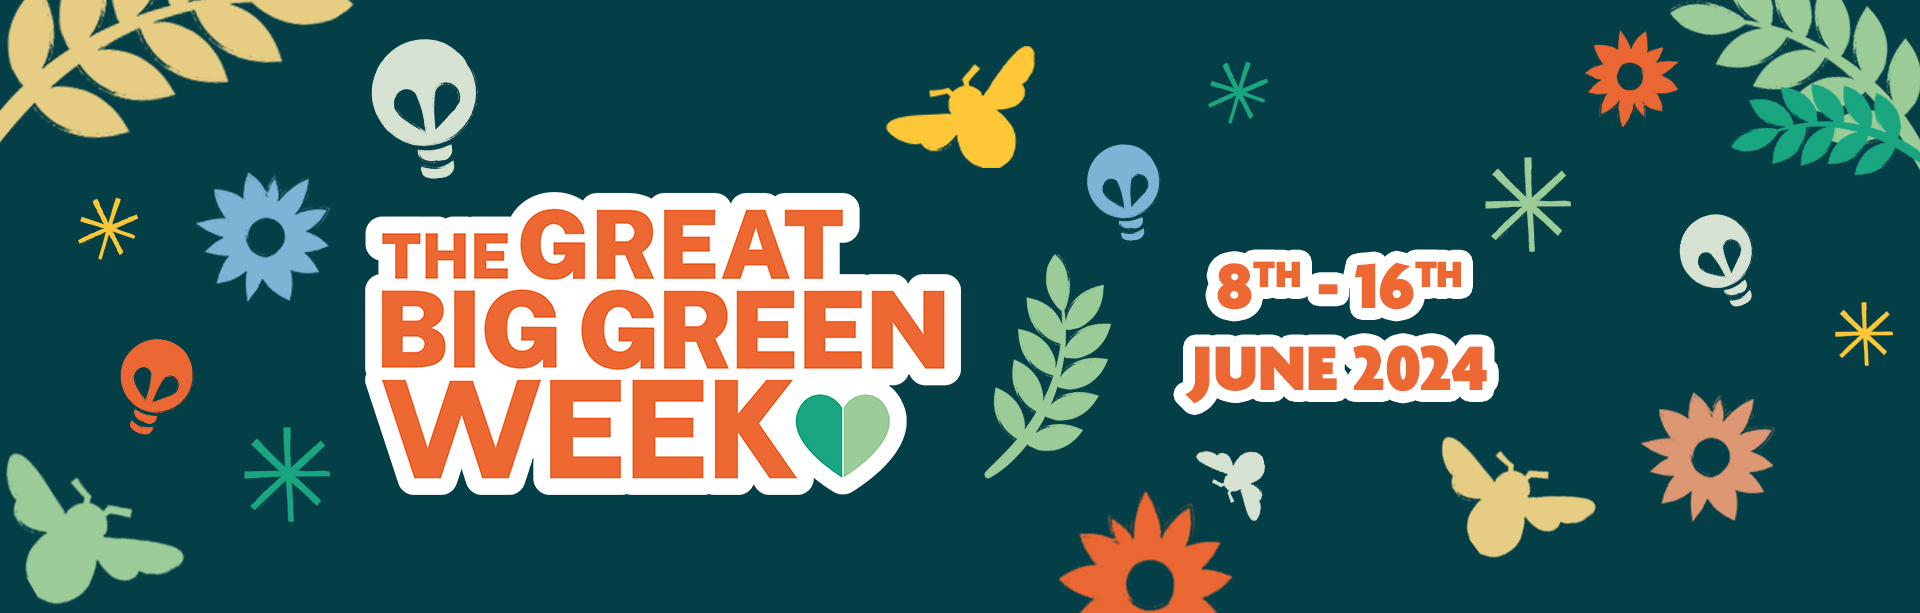 The great big green week banner